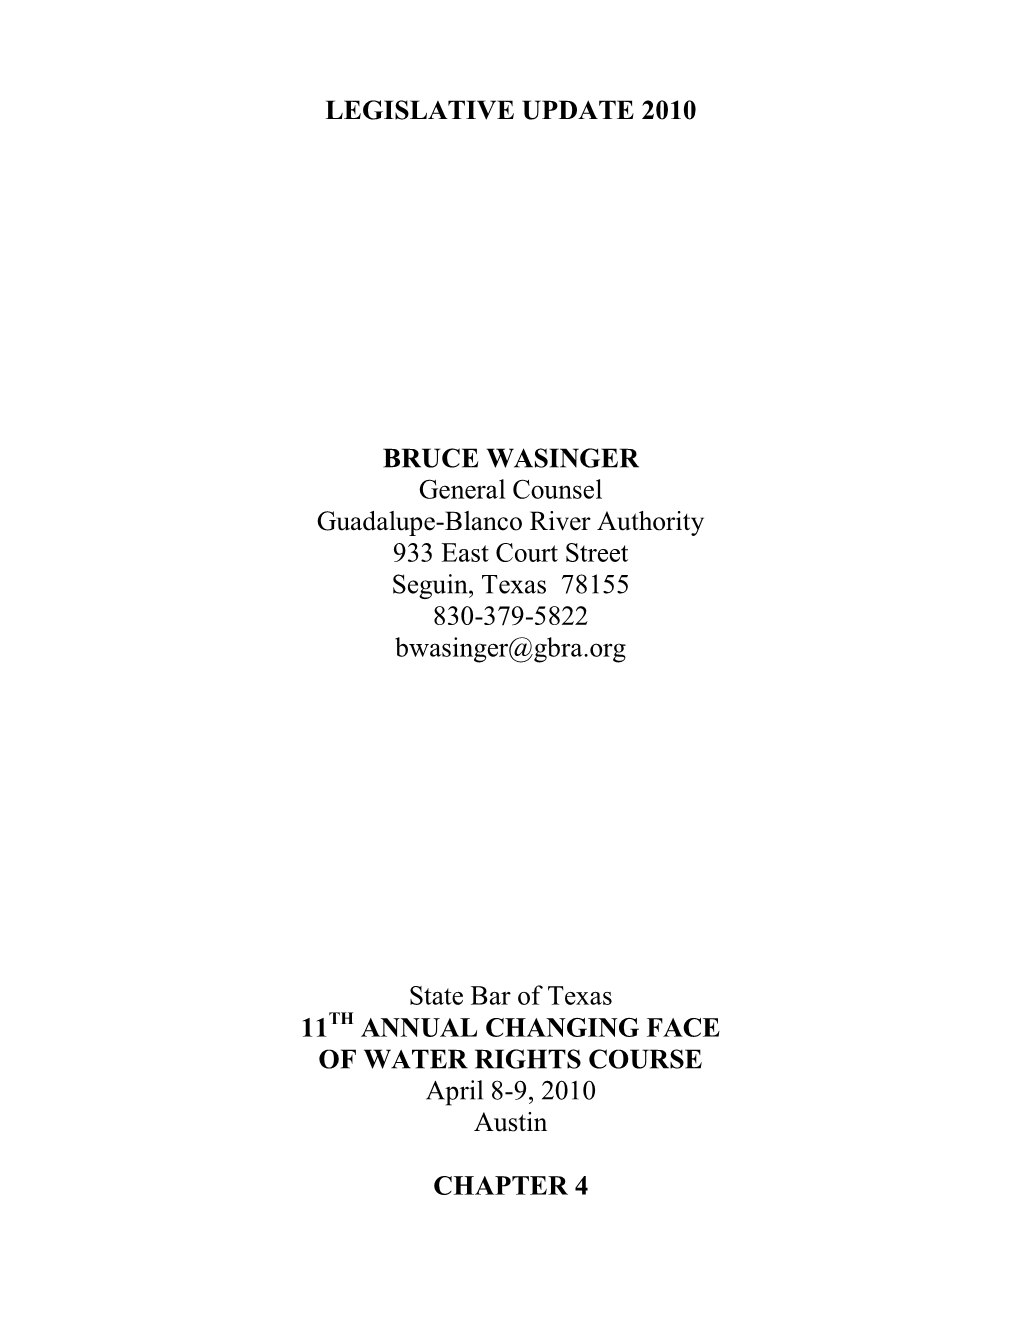 Tenth Annual Changing Force of Water Rights